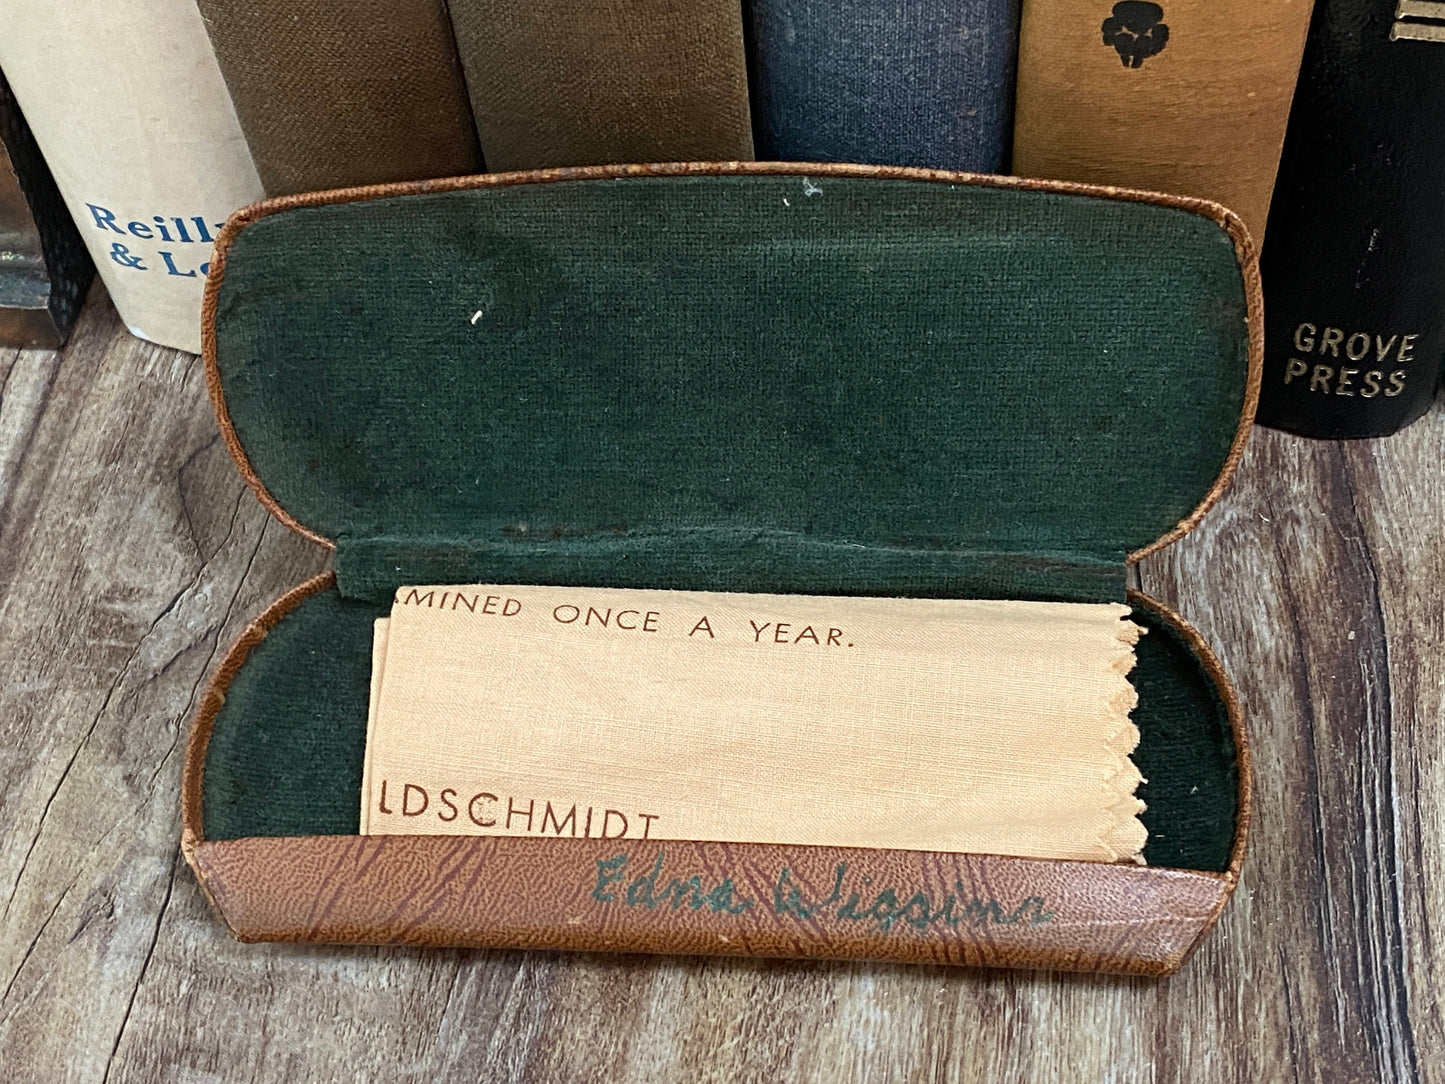 Vintage Eyeglass Case and Cleaning Cloth